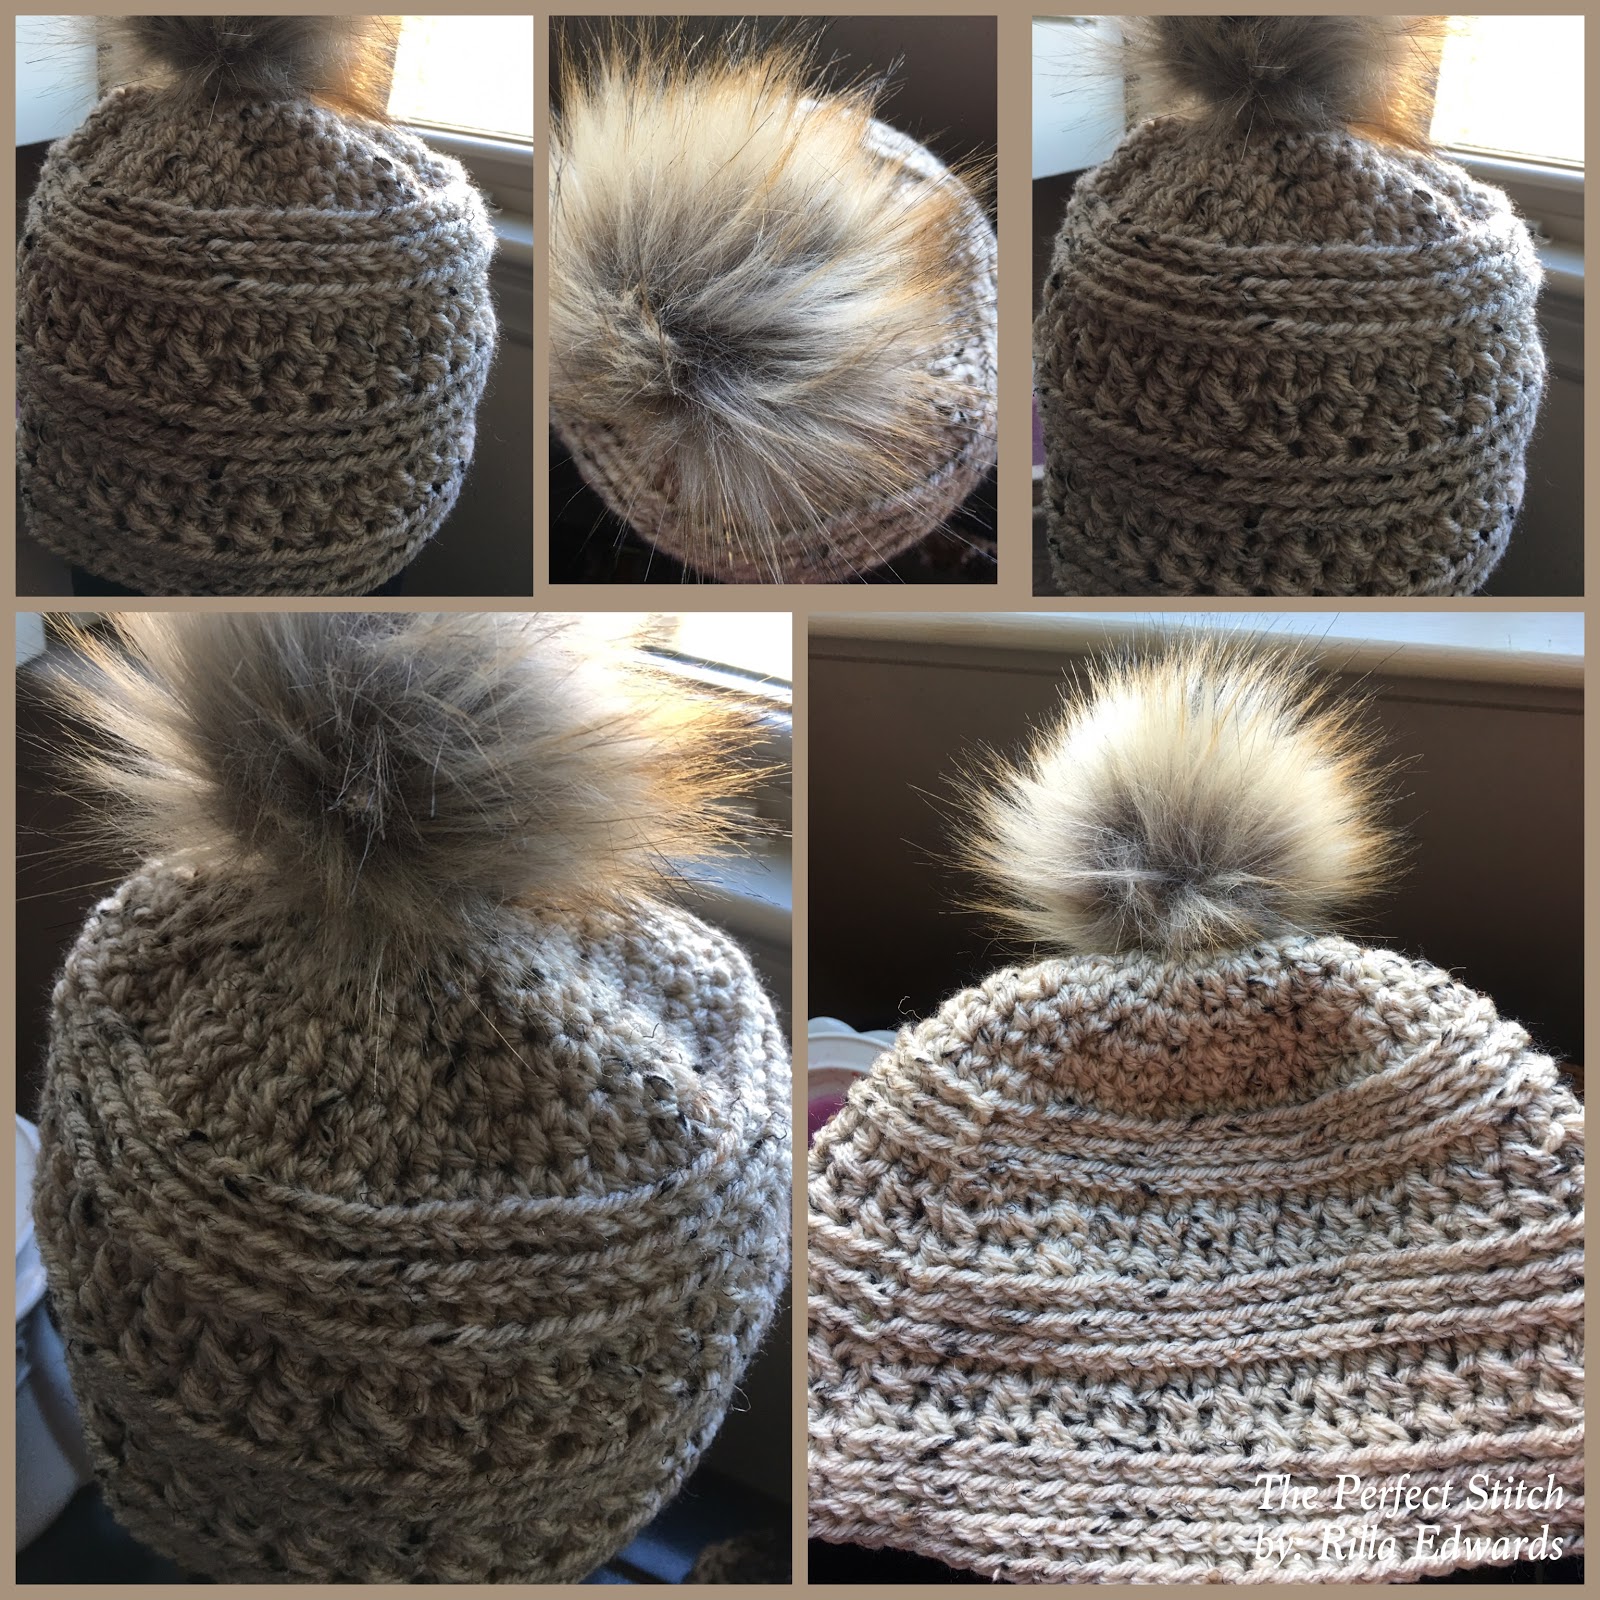 The Perfect Stitch...: Speckled Sand Hat